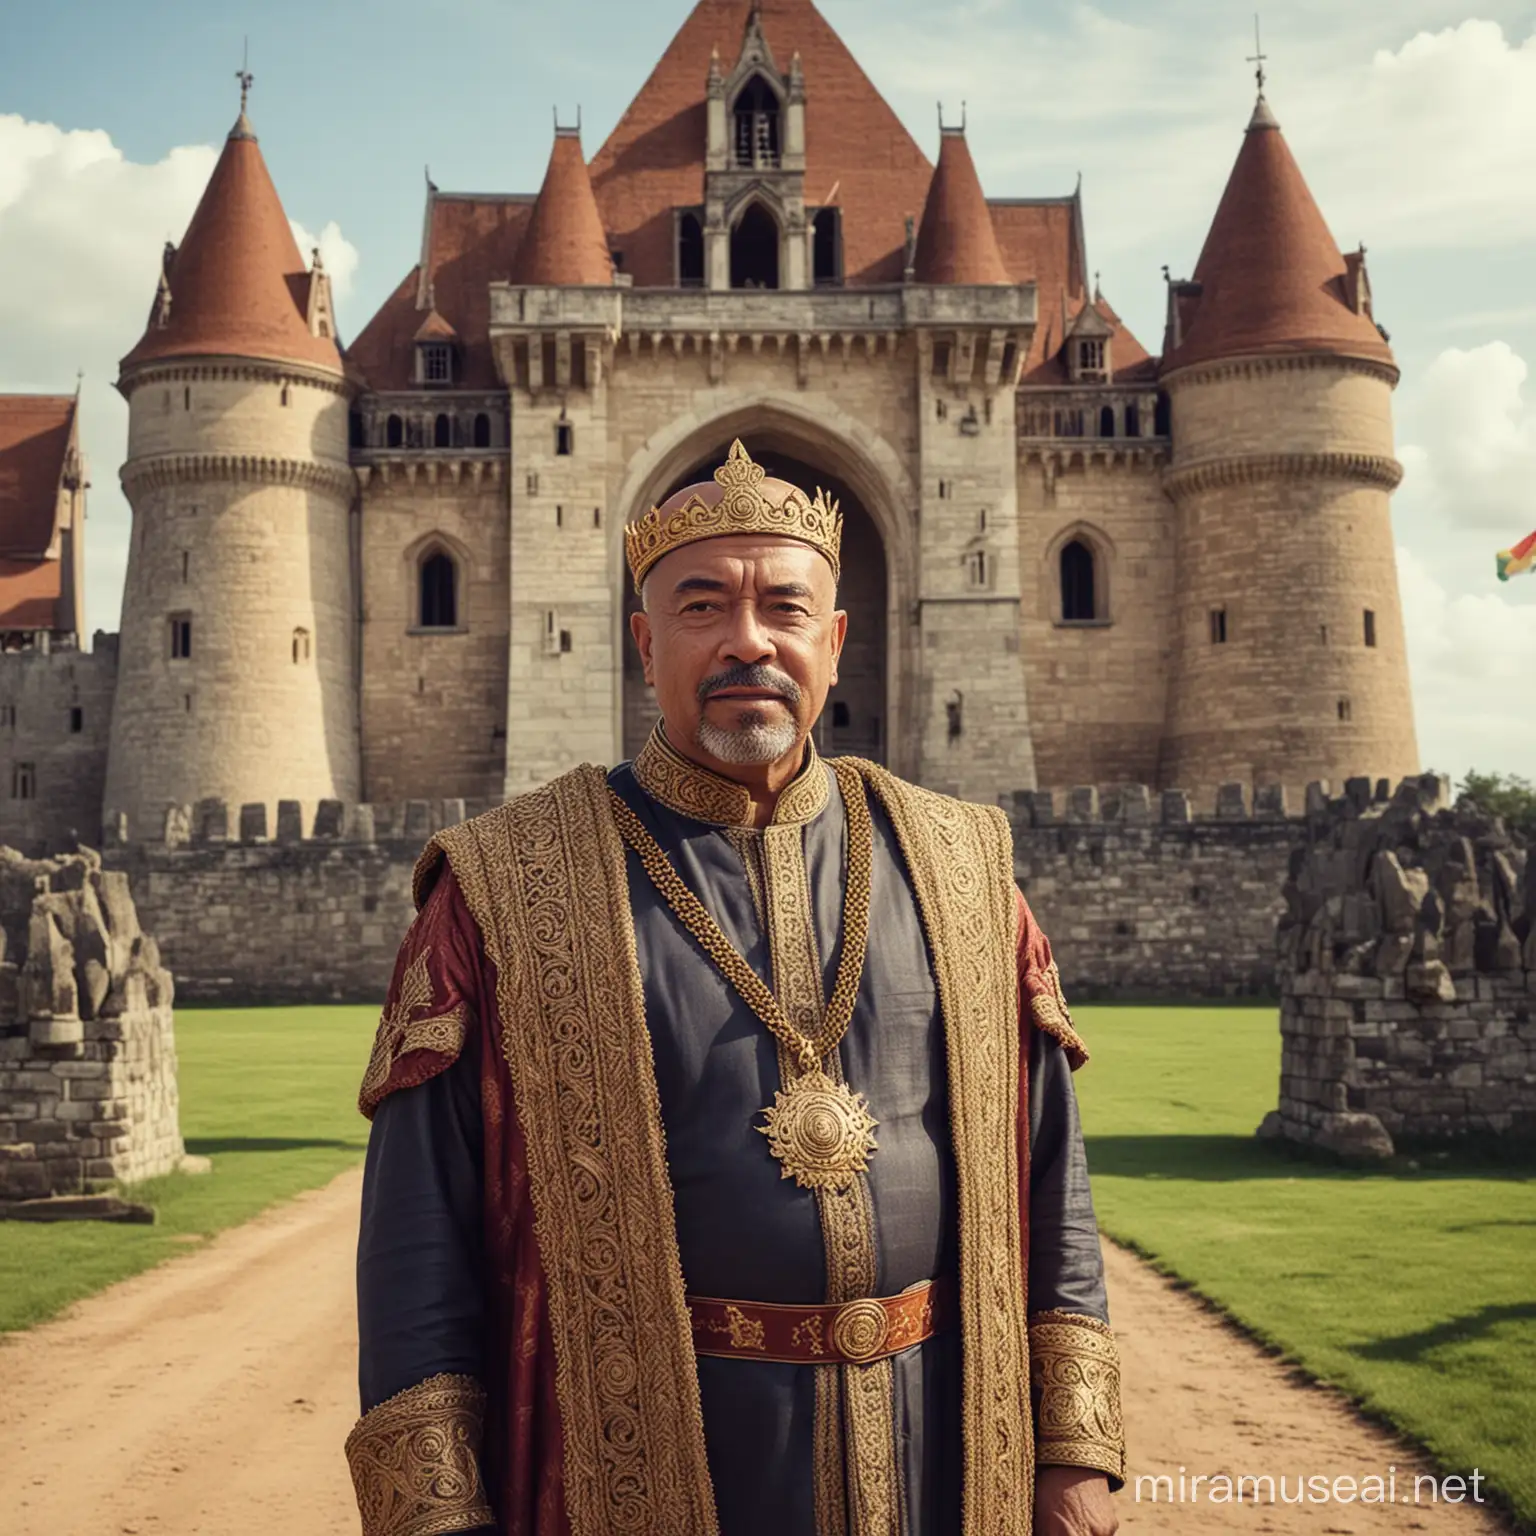 Desi Bouterse as King Standing Before a Majestic 13th Century Castle